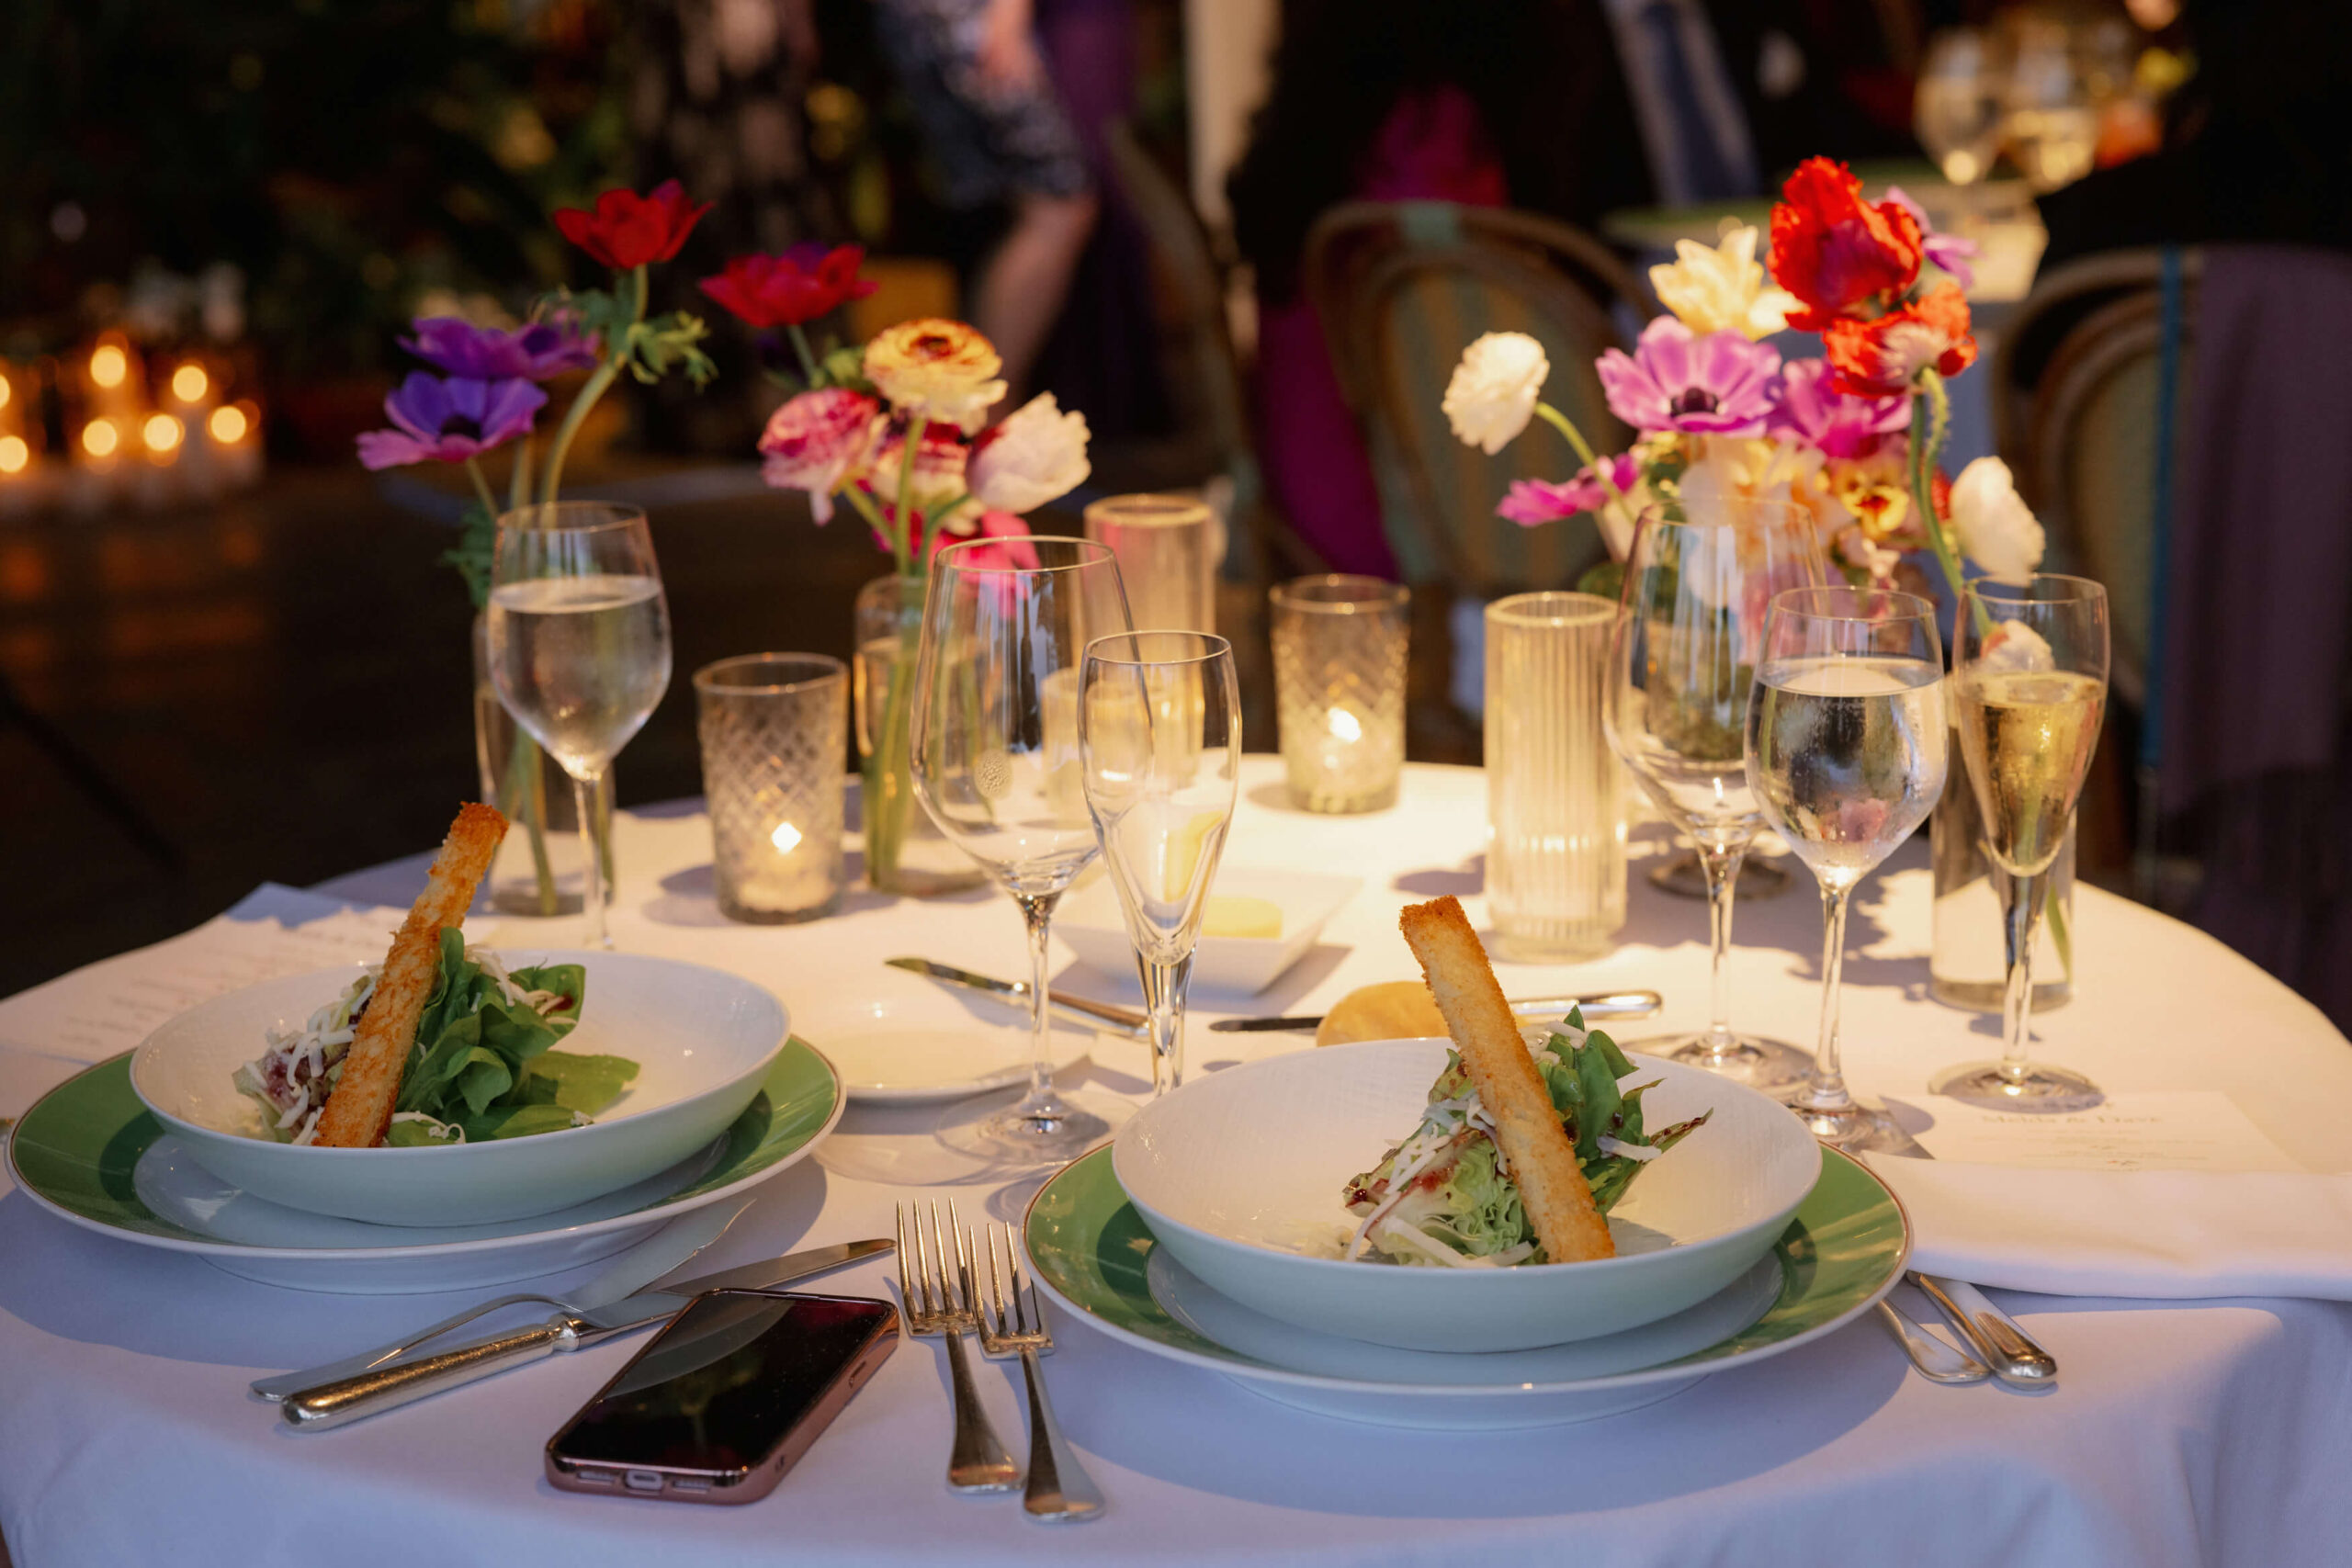 Sumptuous meal for a wedding reception at The River Cafe, New York. Intimate wedding image by Jenny Fu Studio